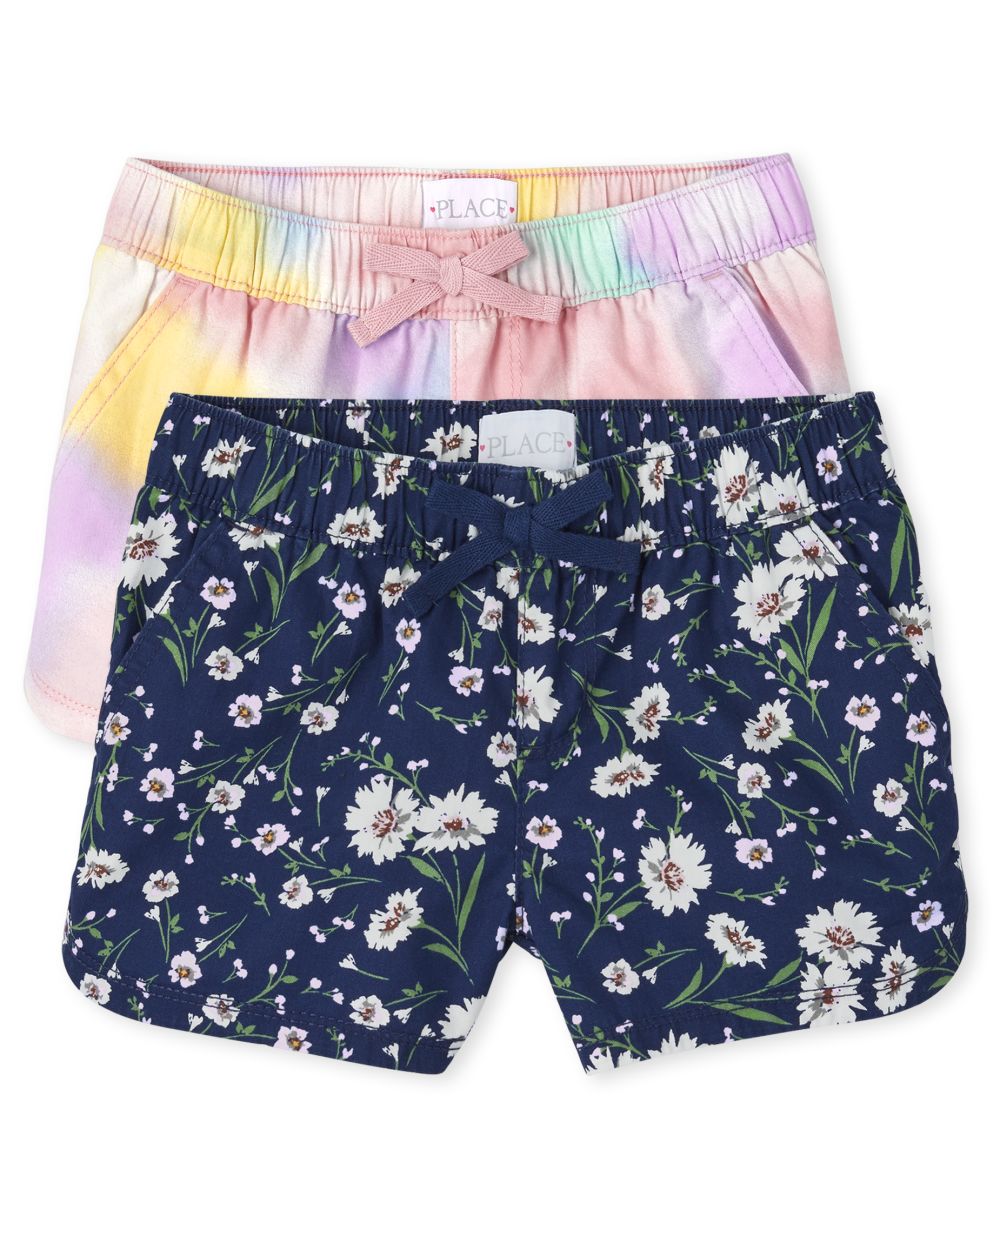 The Children's Place Girls Print Twill Pull On Shorts 2-Pack - Pink - 4,5,6,6X/7,8,10,12,14,16,